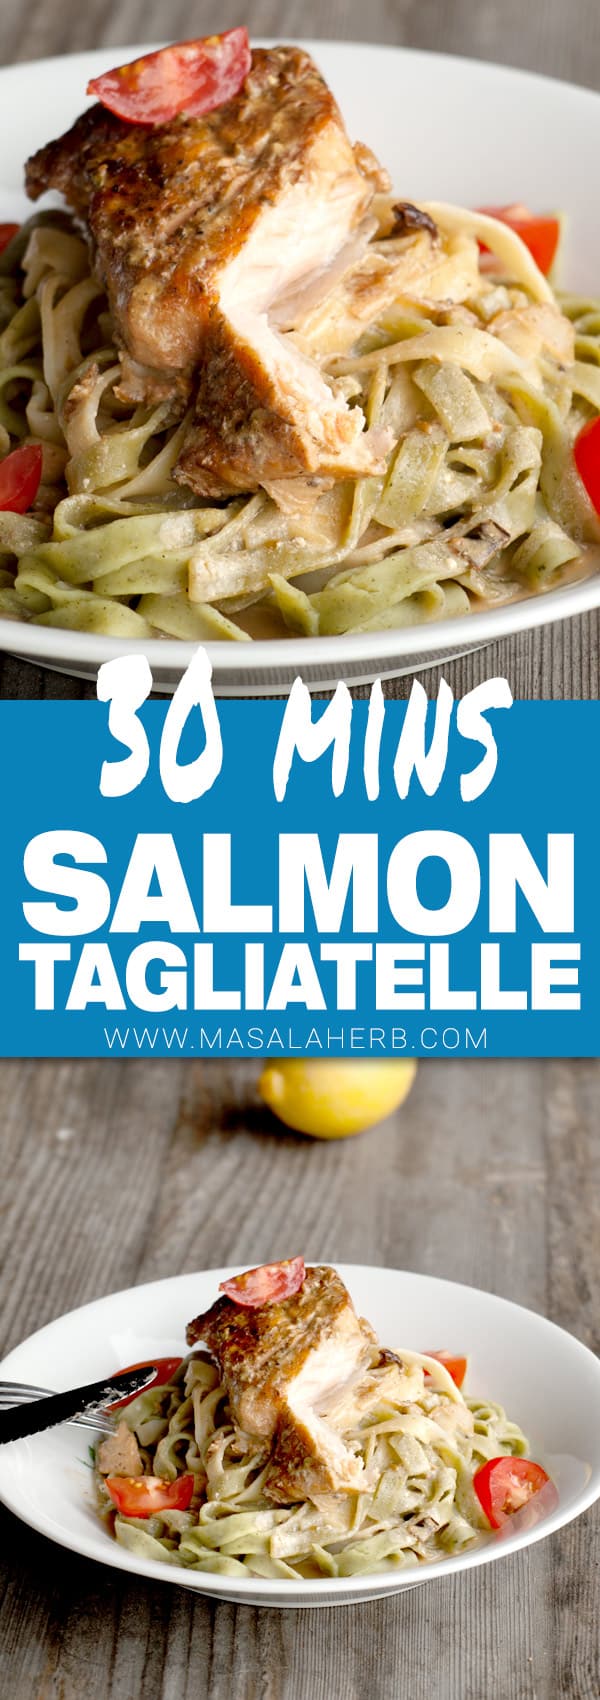 30 Minutes Pan-Fried Salmon in White Wine Sauce with Tagliatelle Pasta Recipe. 